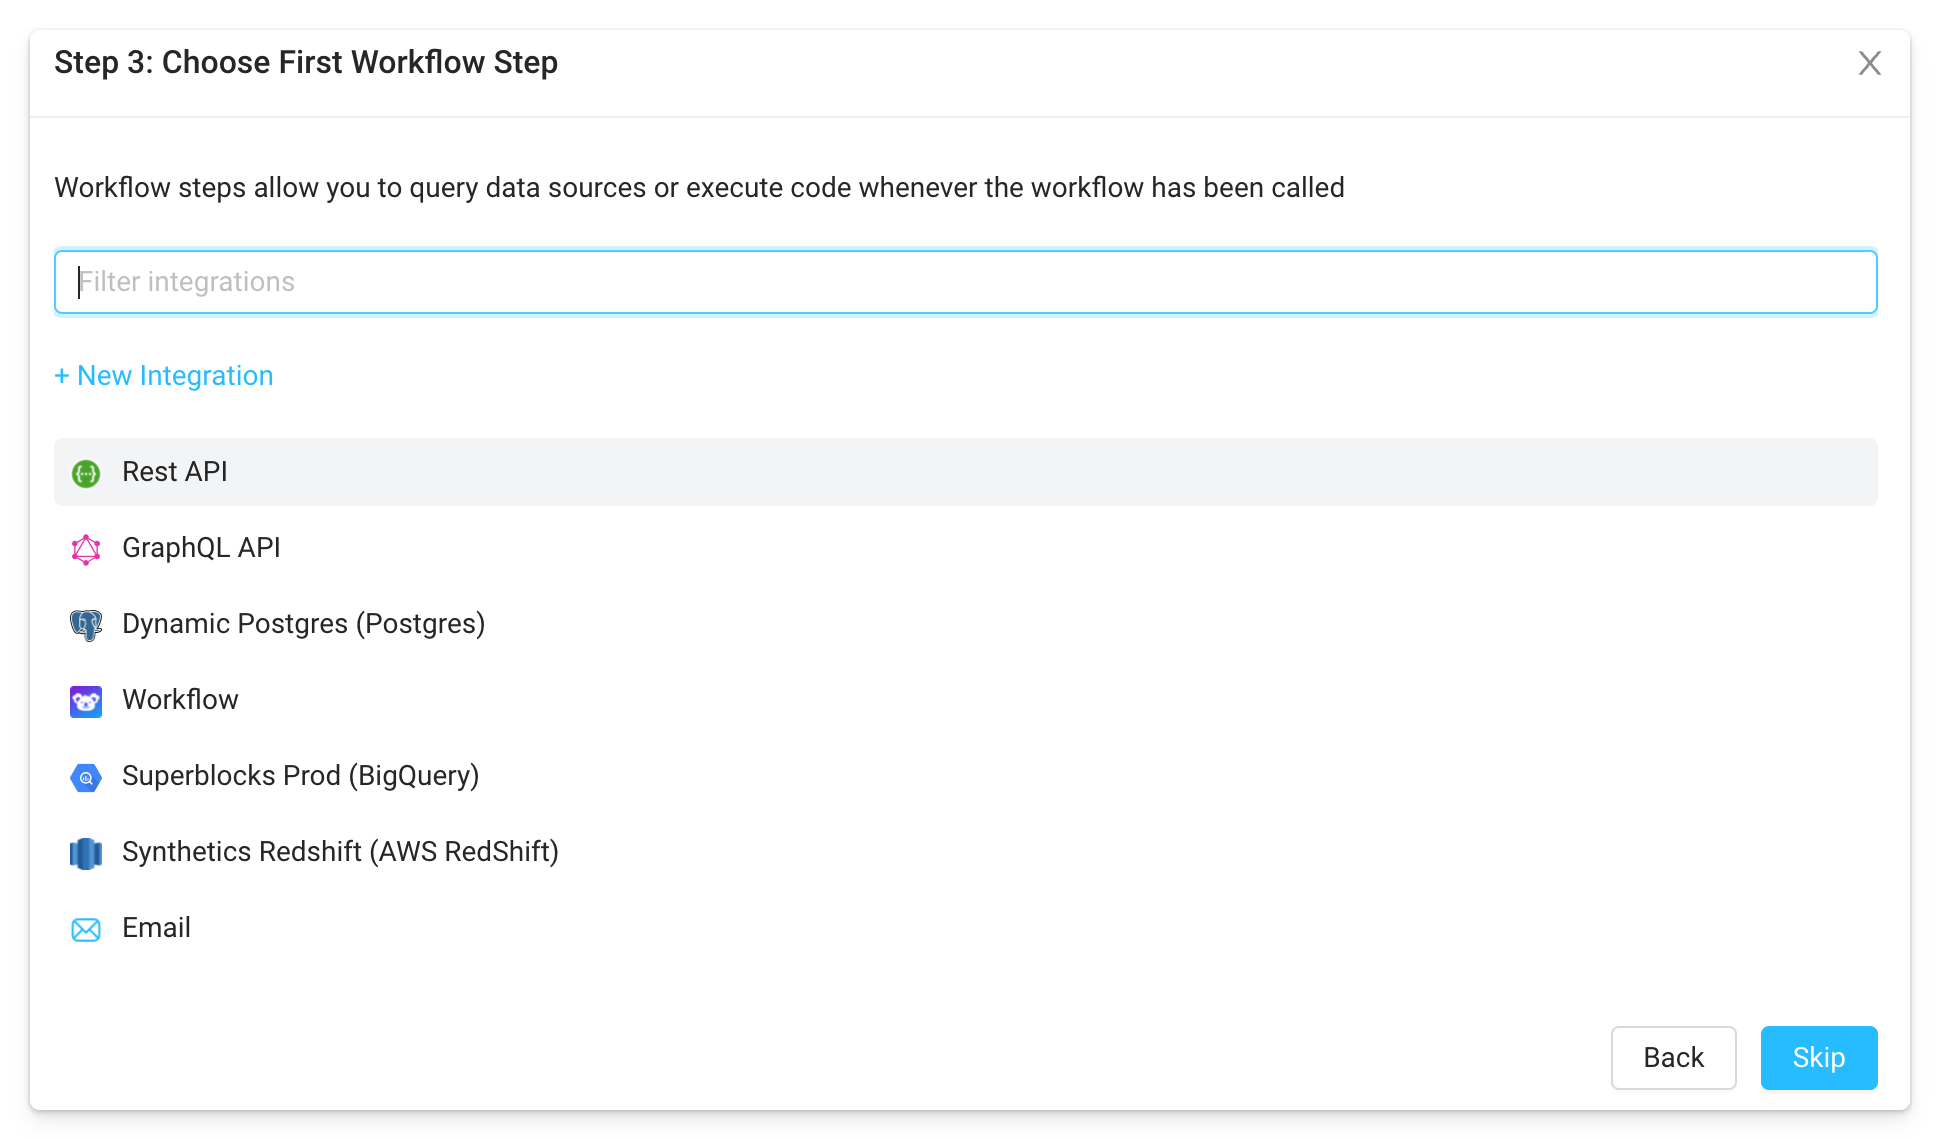 Workflow steps allow you to query data sources or execute code and return a result